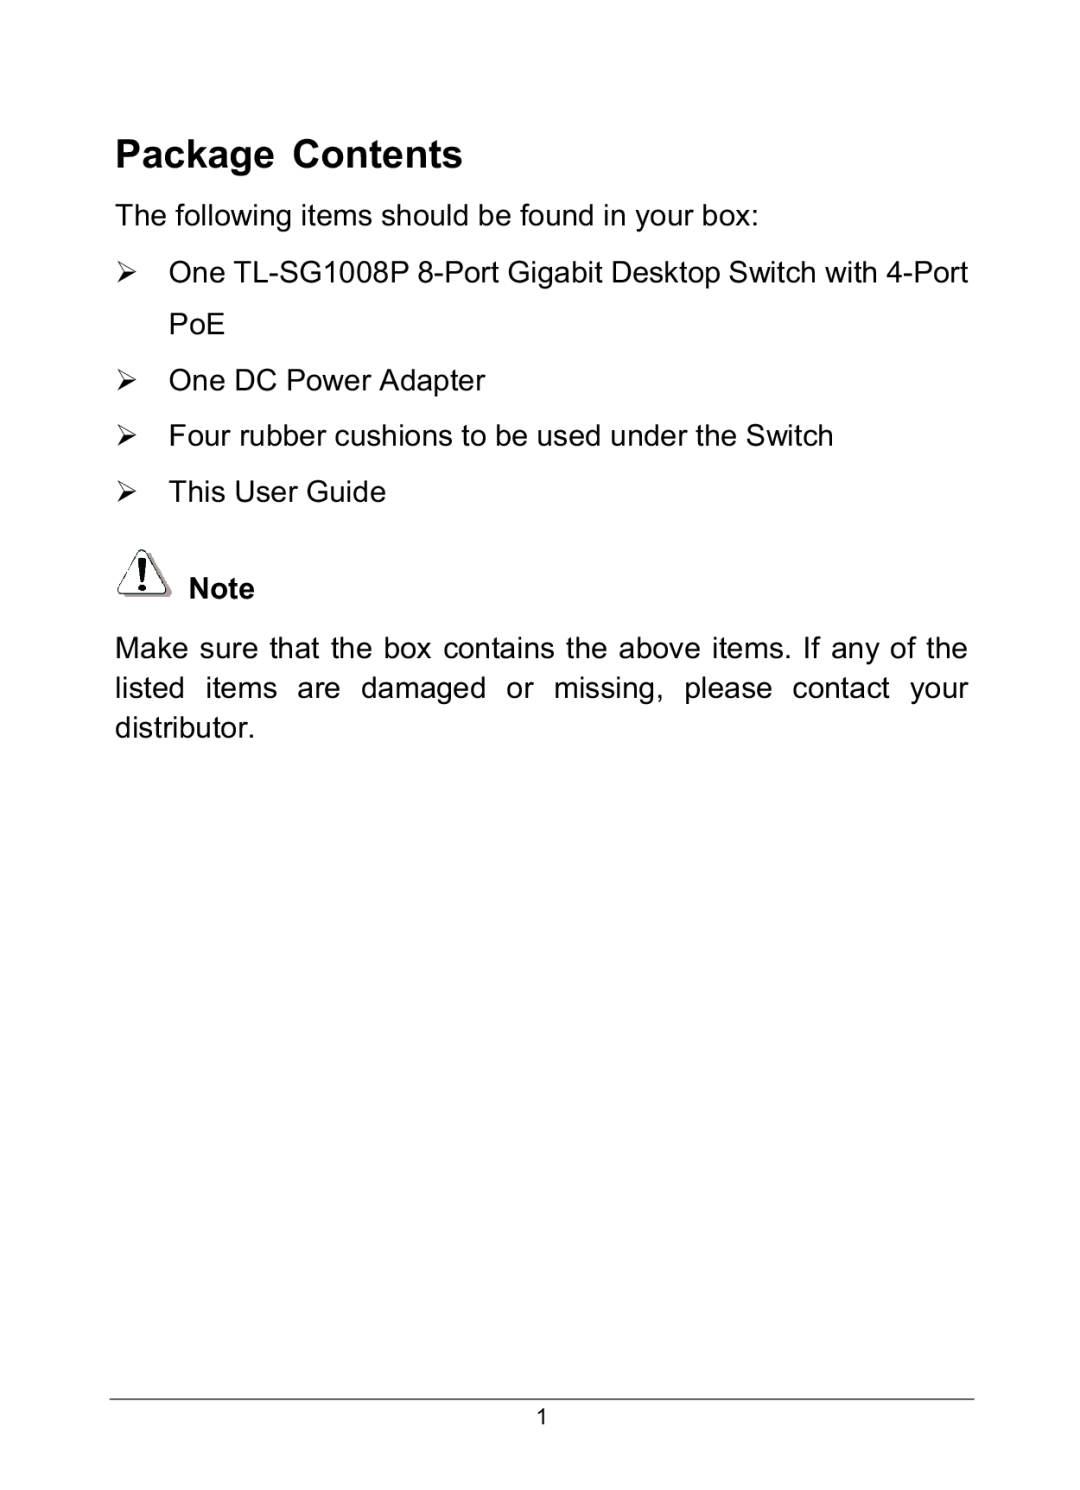 TP-Link TL-SG1008P manual Package Contents, The following items should be found in your box, This User Guide 